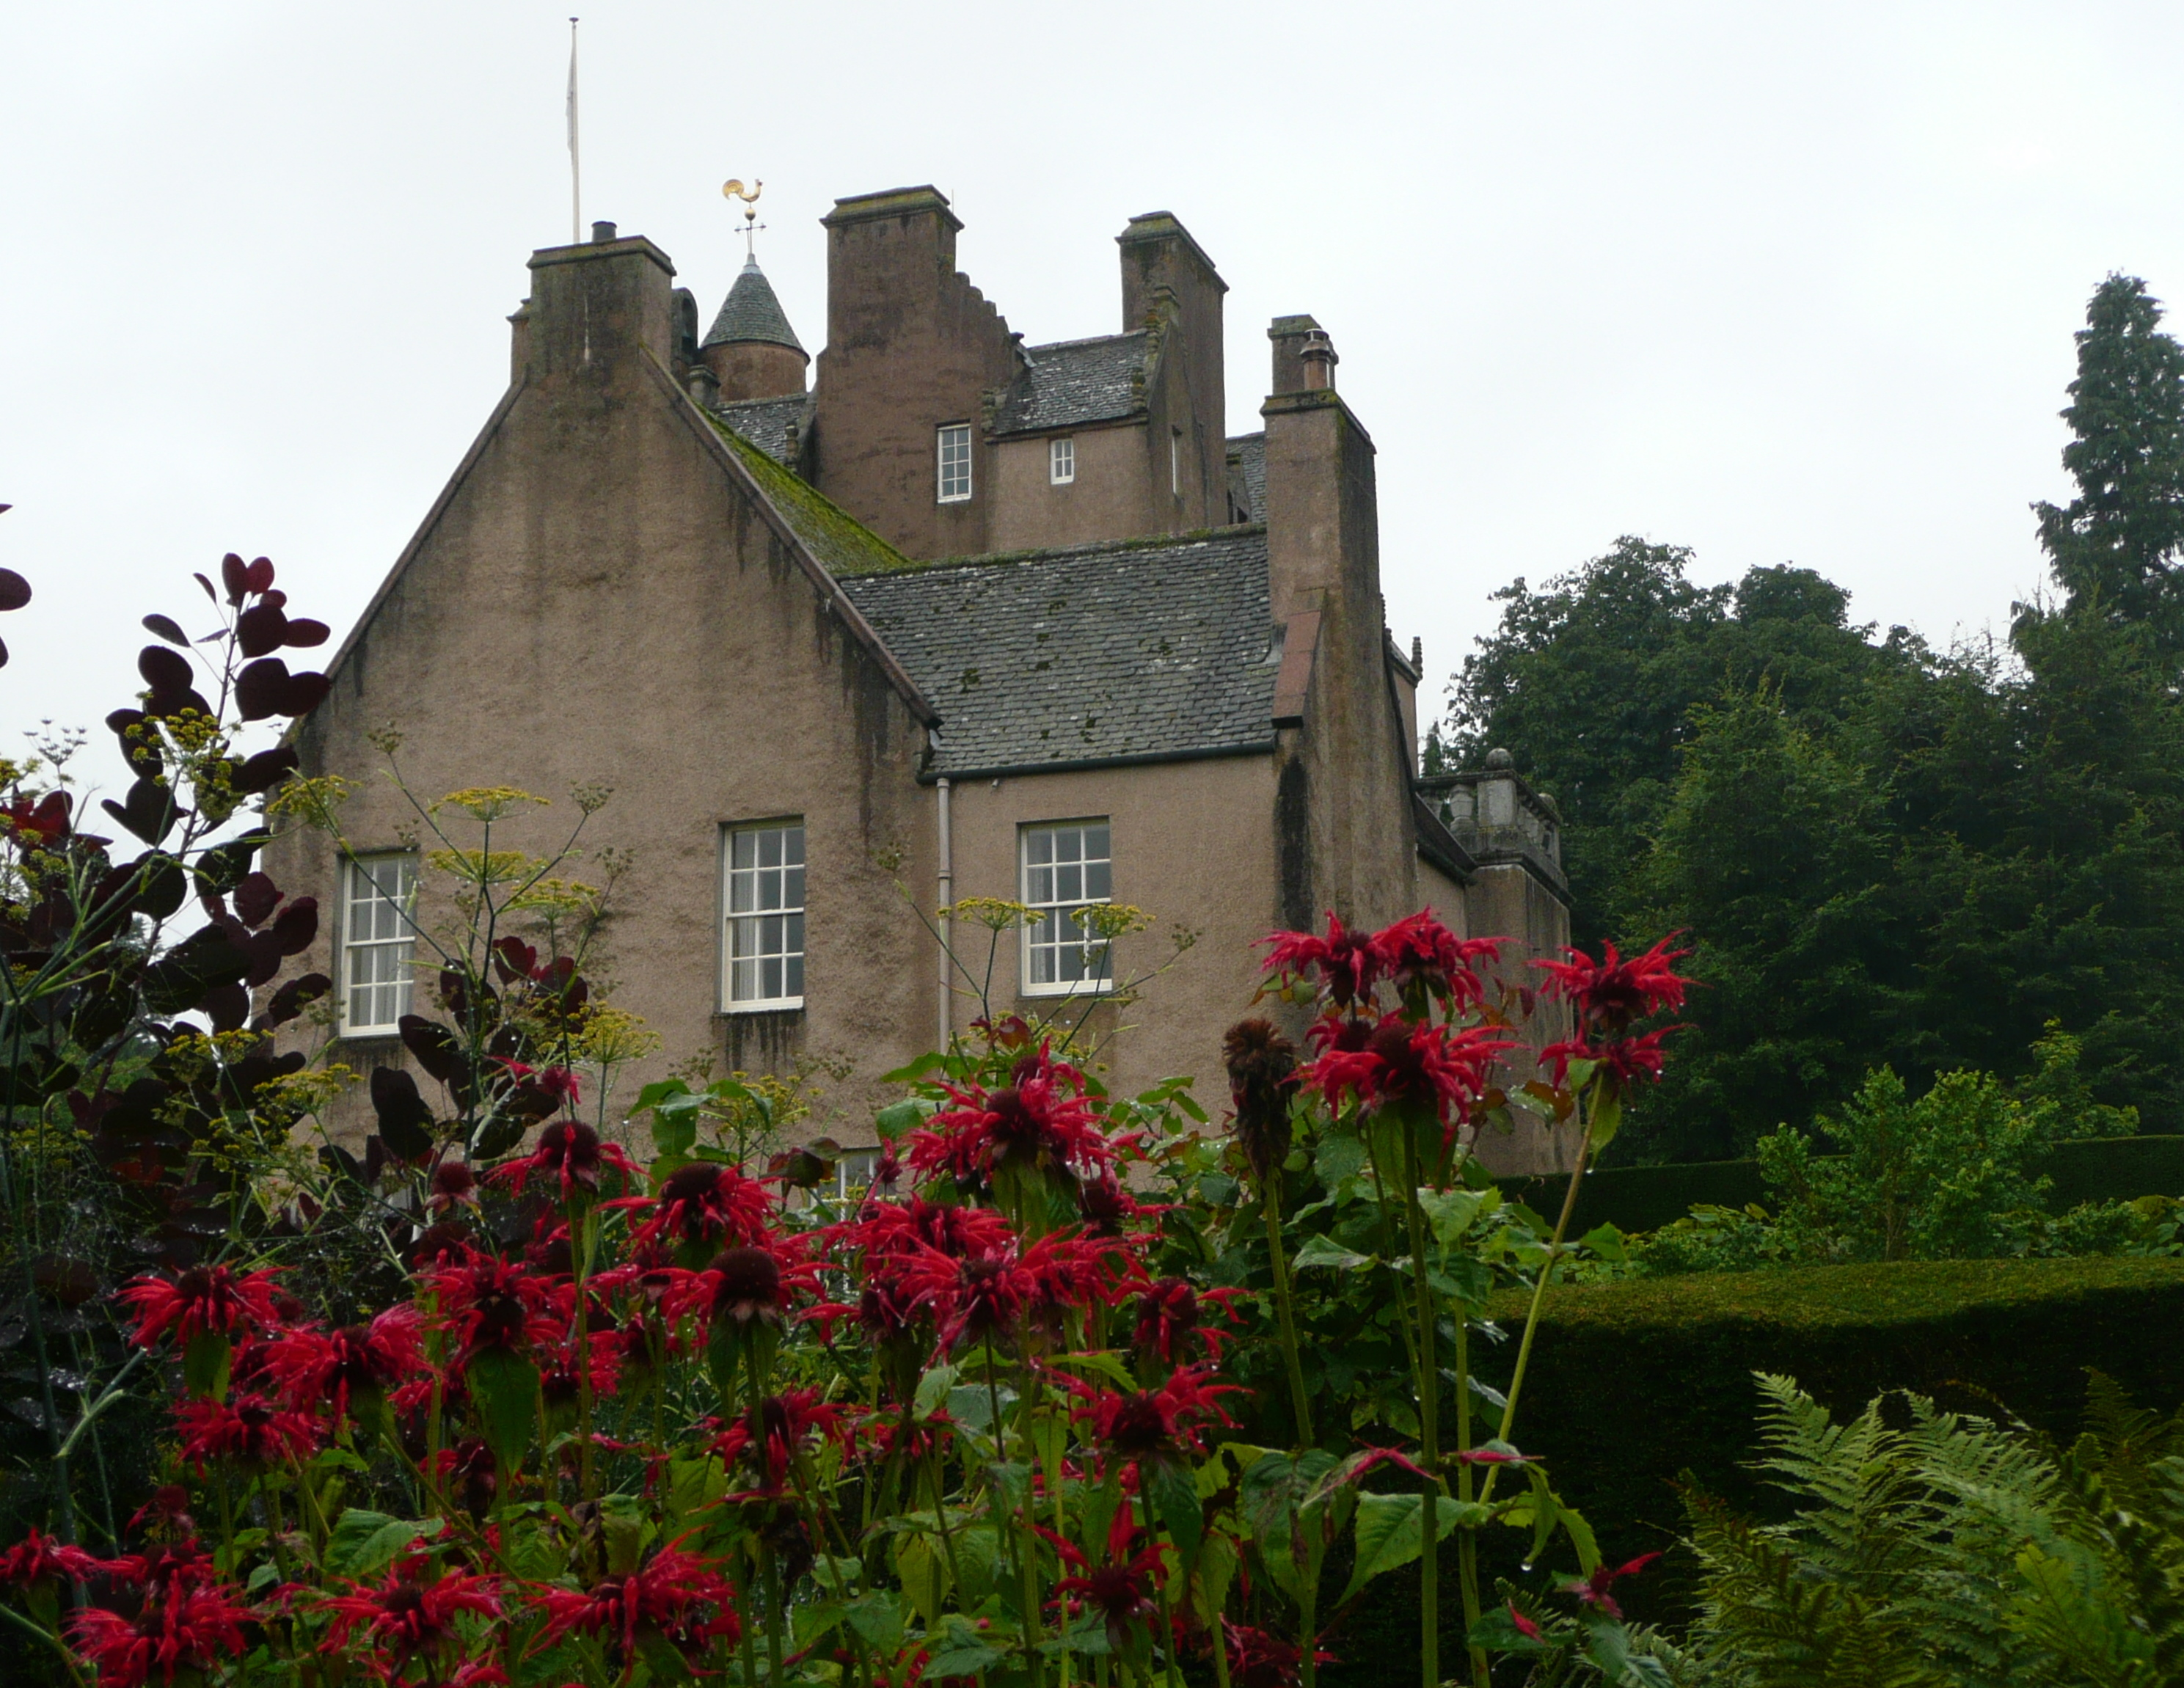 Crathes Castle from the garden. (2005)